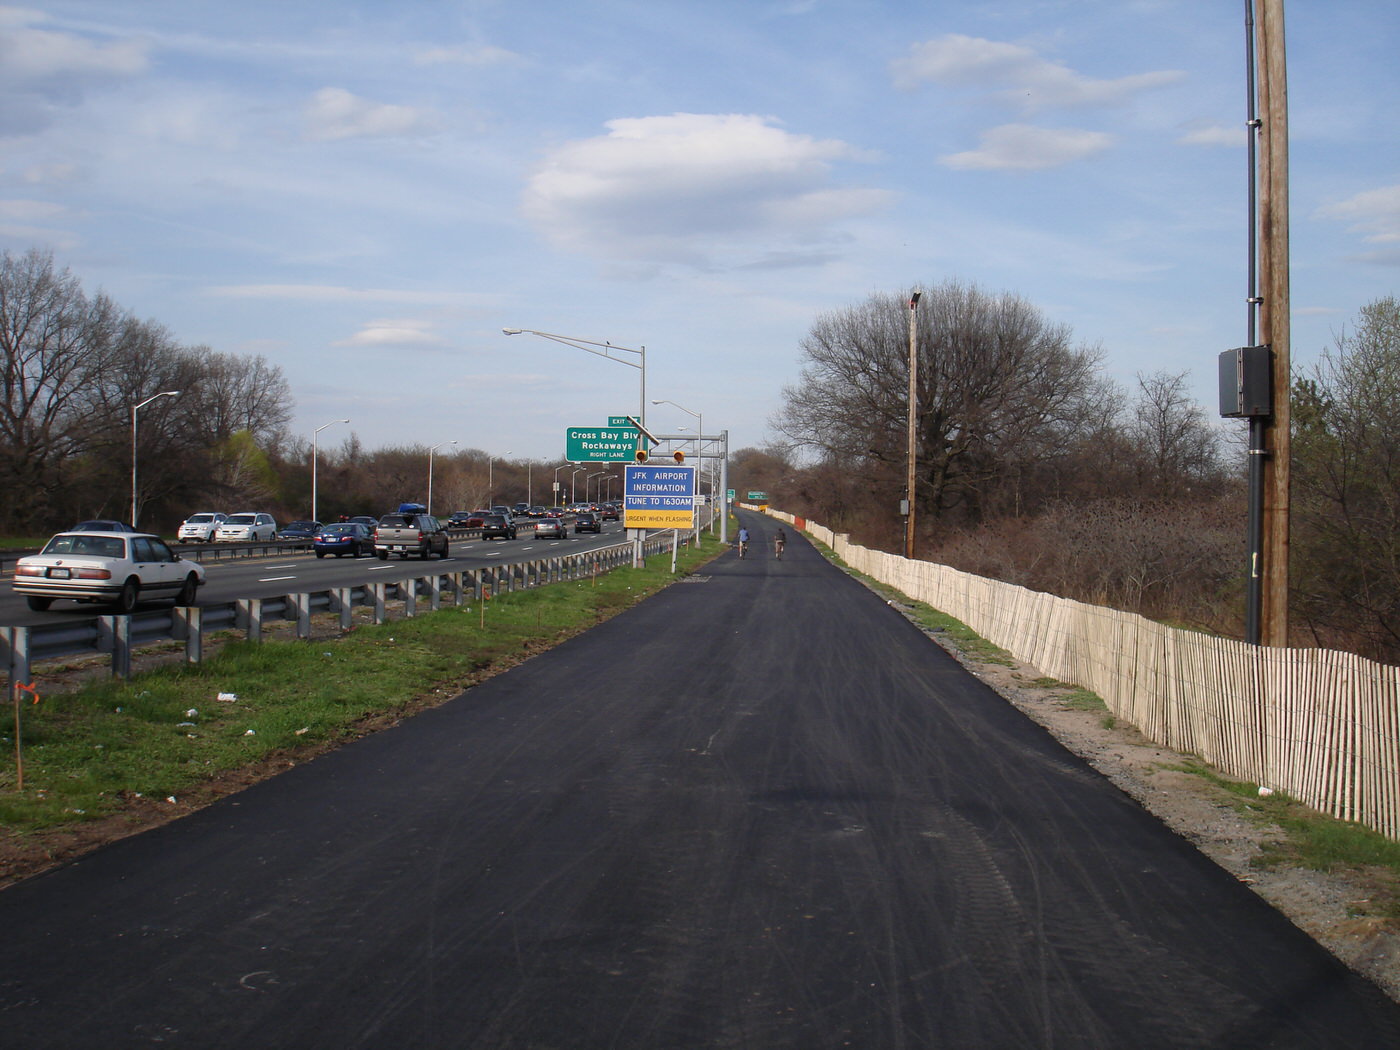 Brand New Shore Parkway Greenway Between The Spring Creek Bridge And The Howard Beach Exit, Queens, 2009.